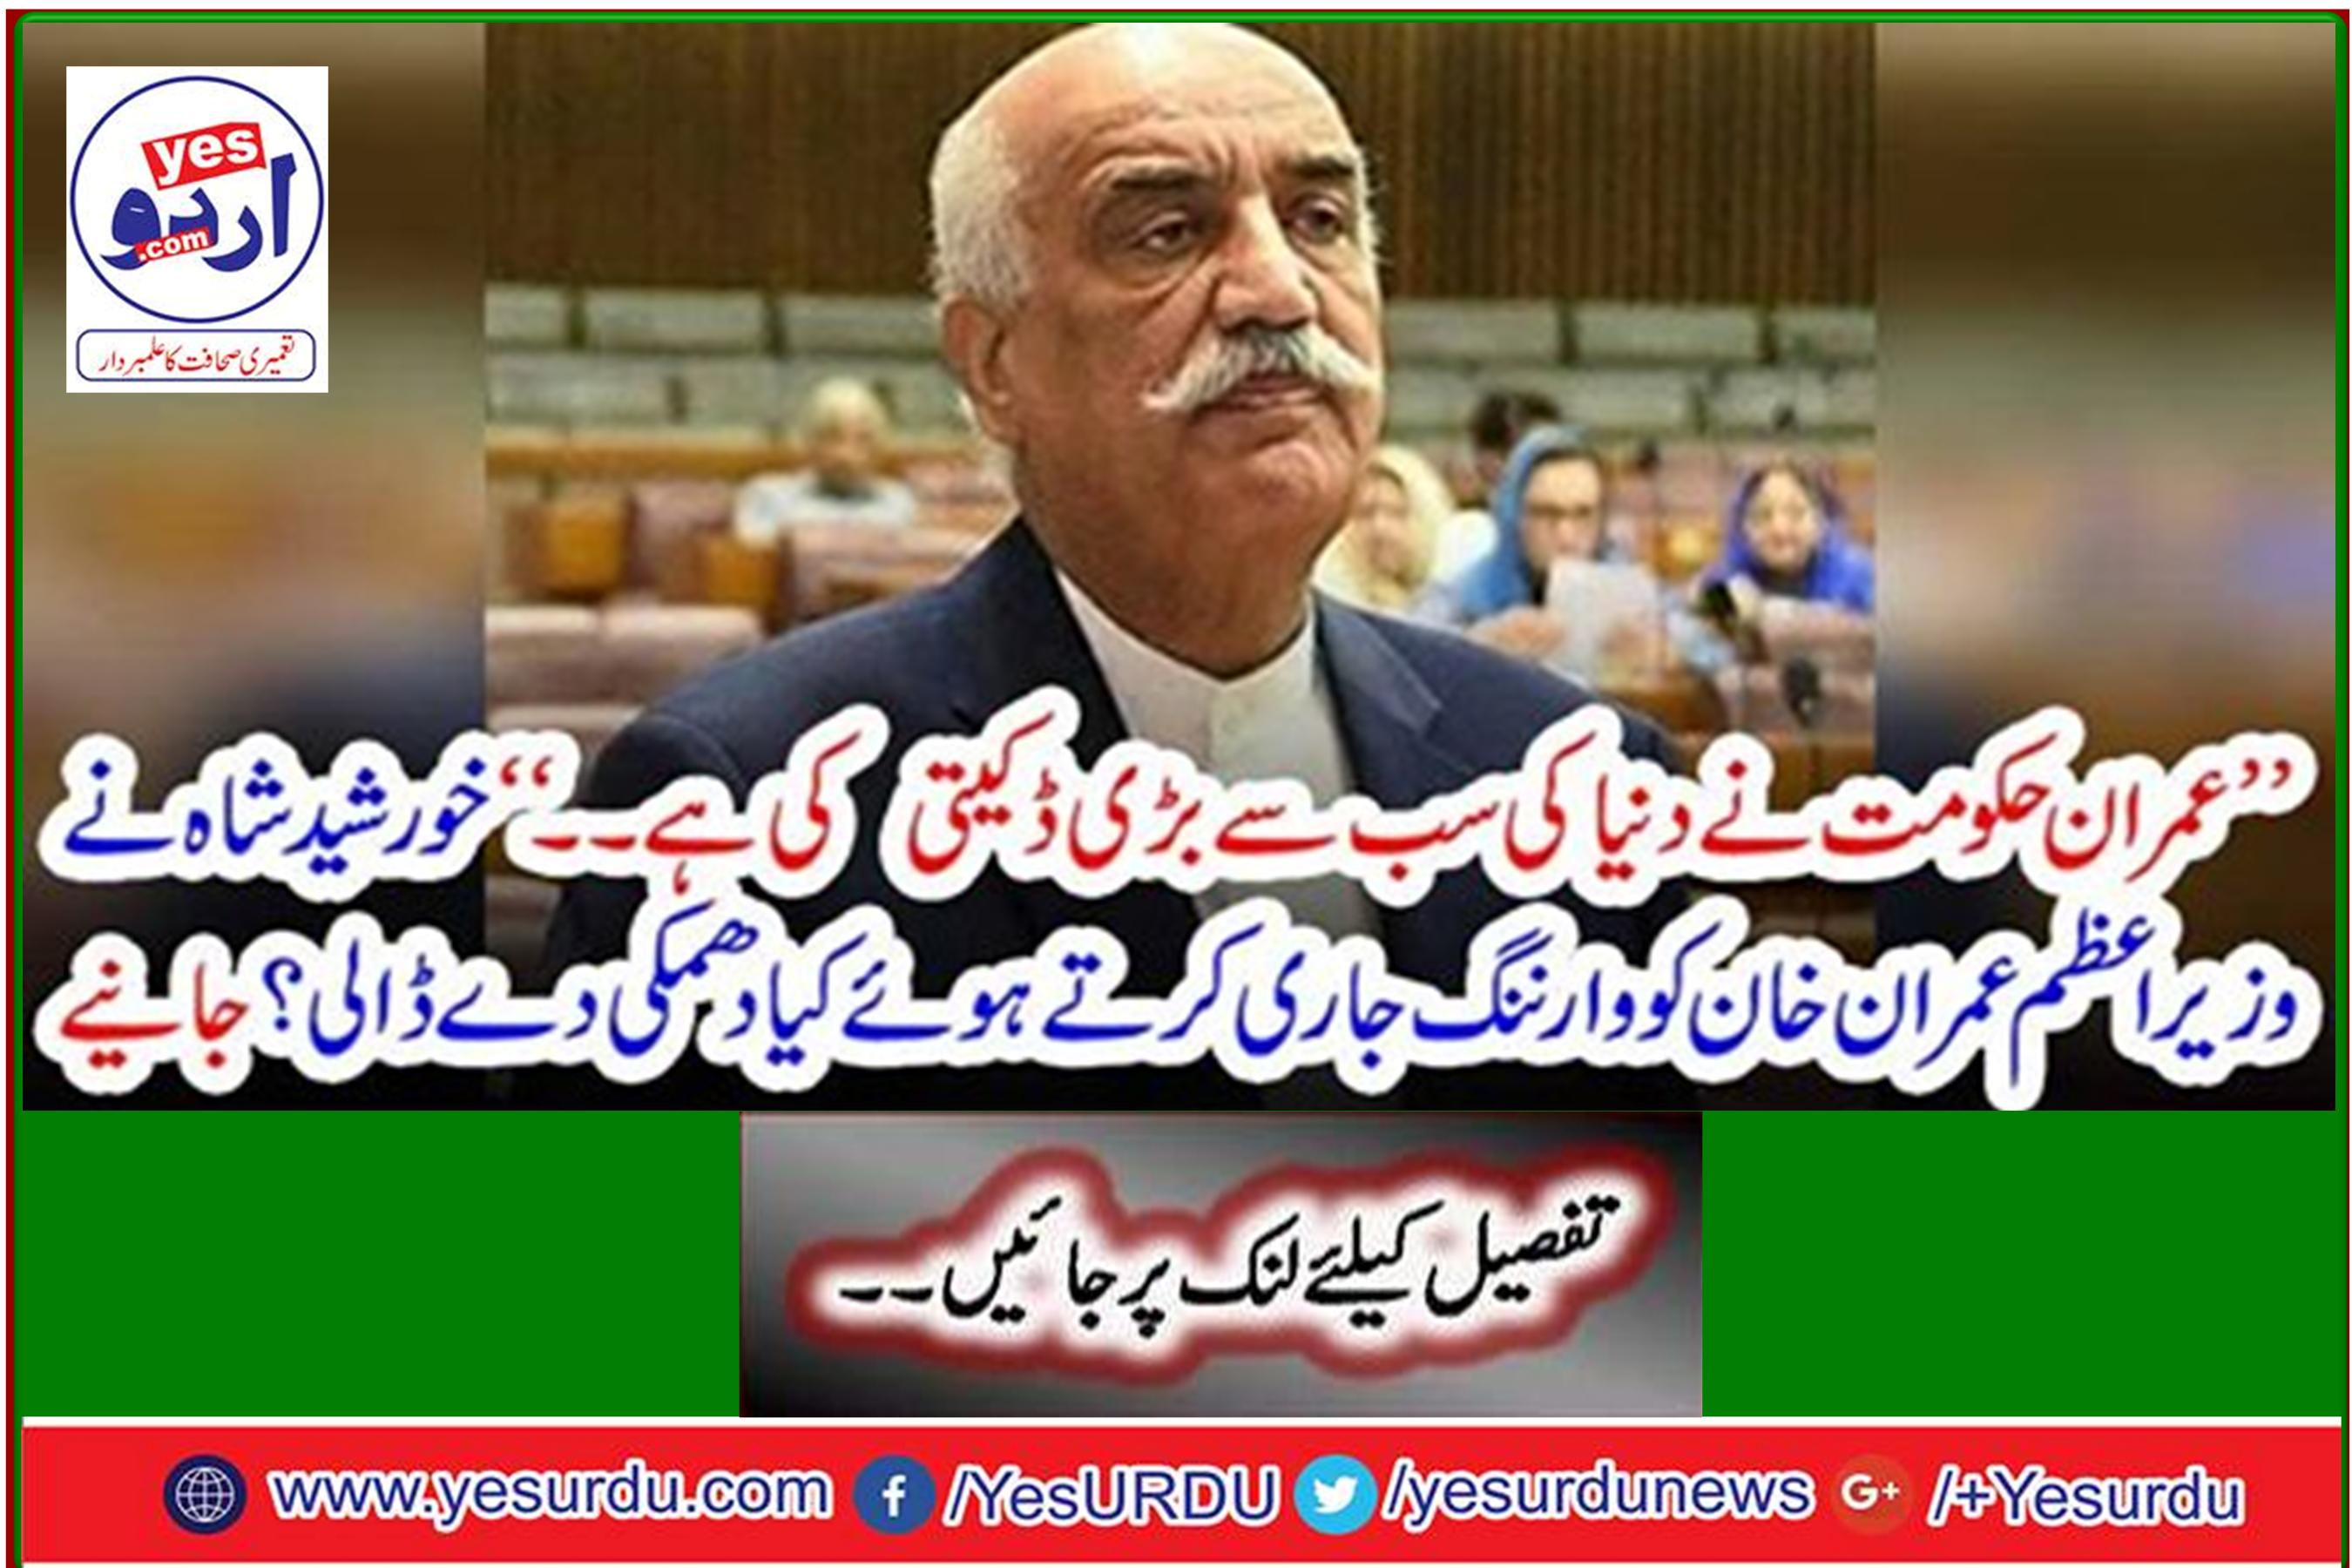 'What threat did Khurshid Shah give to Prime Minister Imran Khan by issuing a warning? Learn